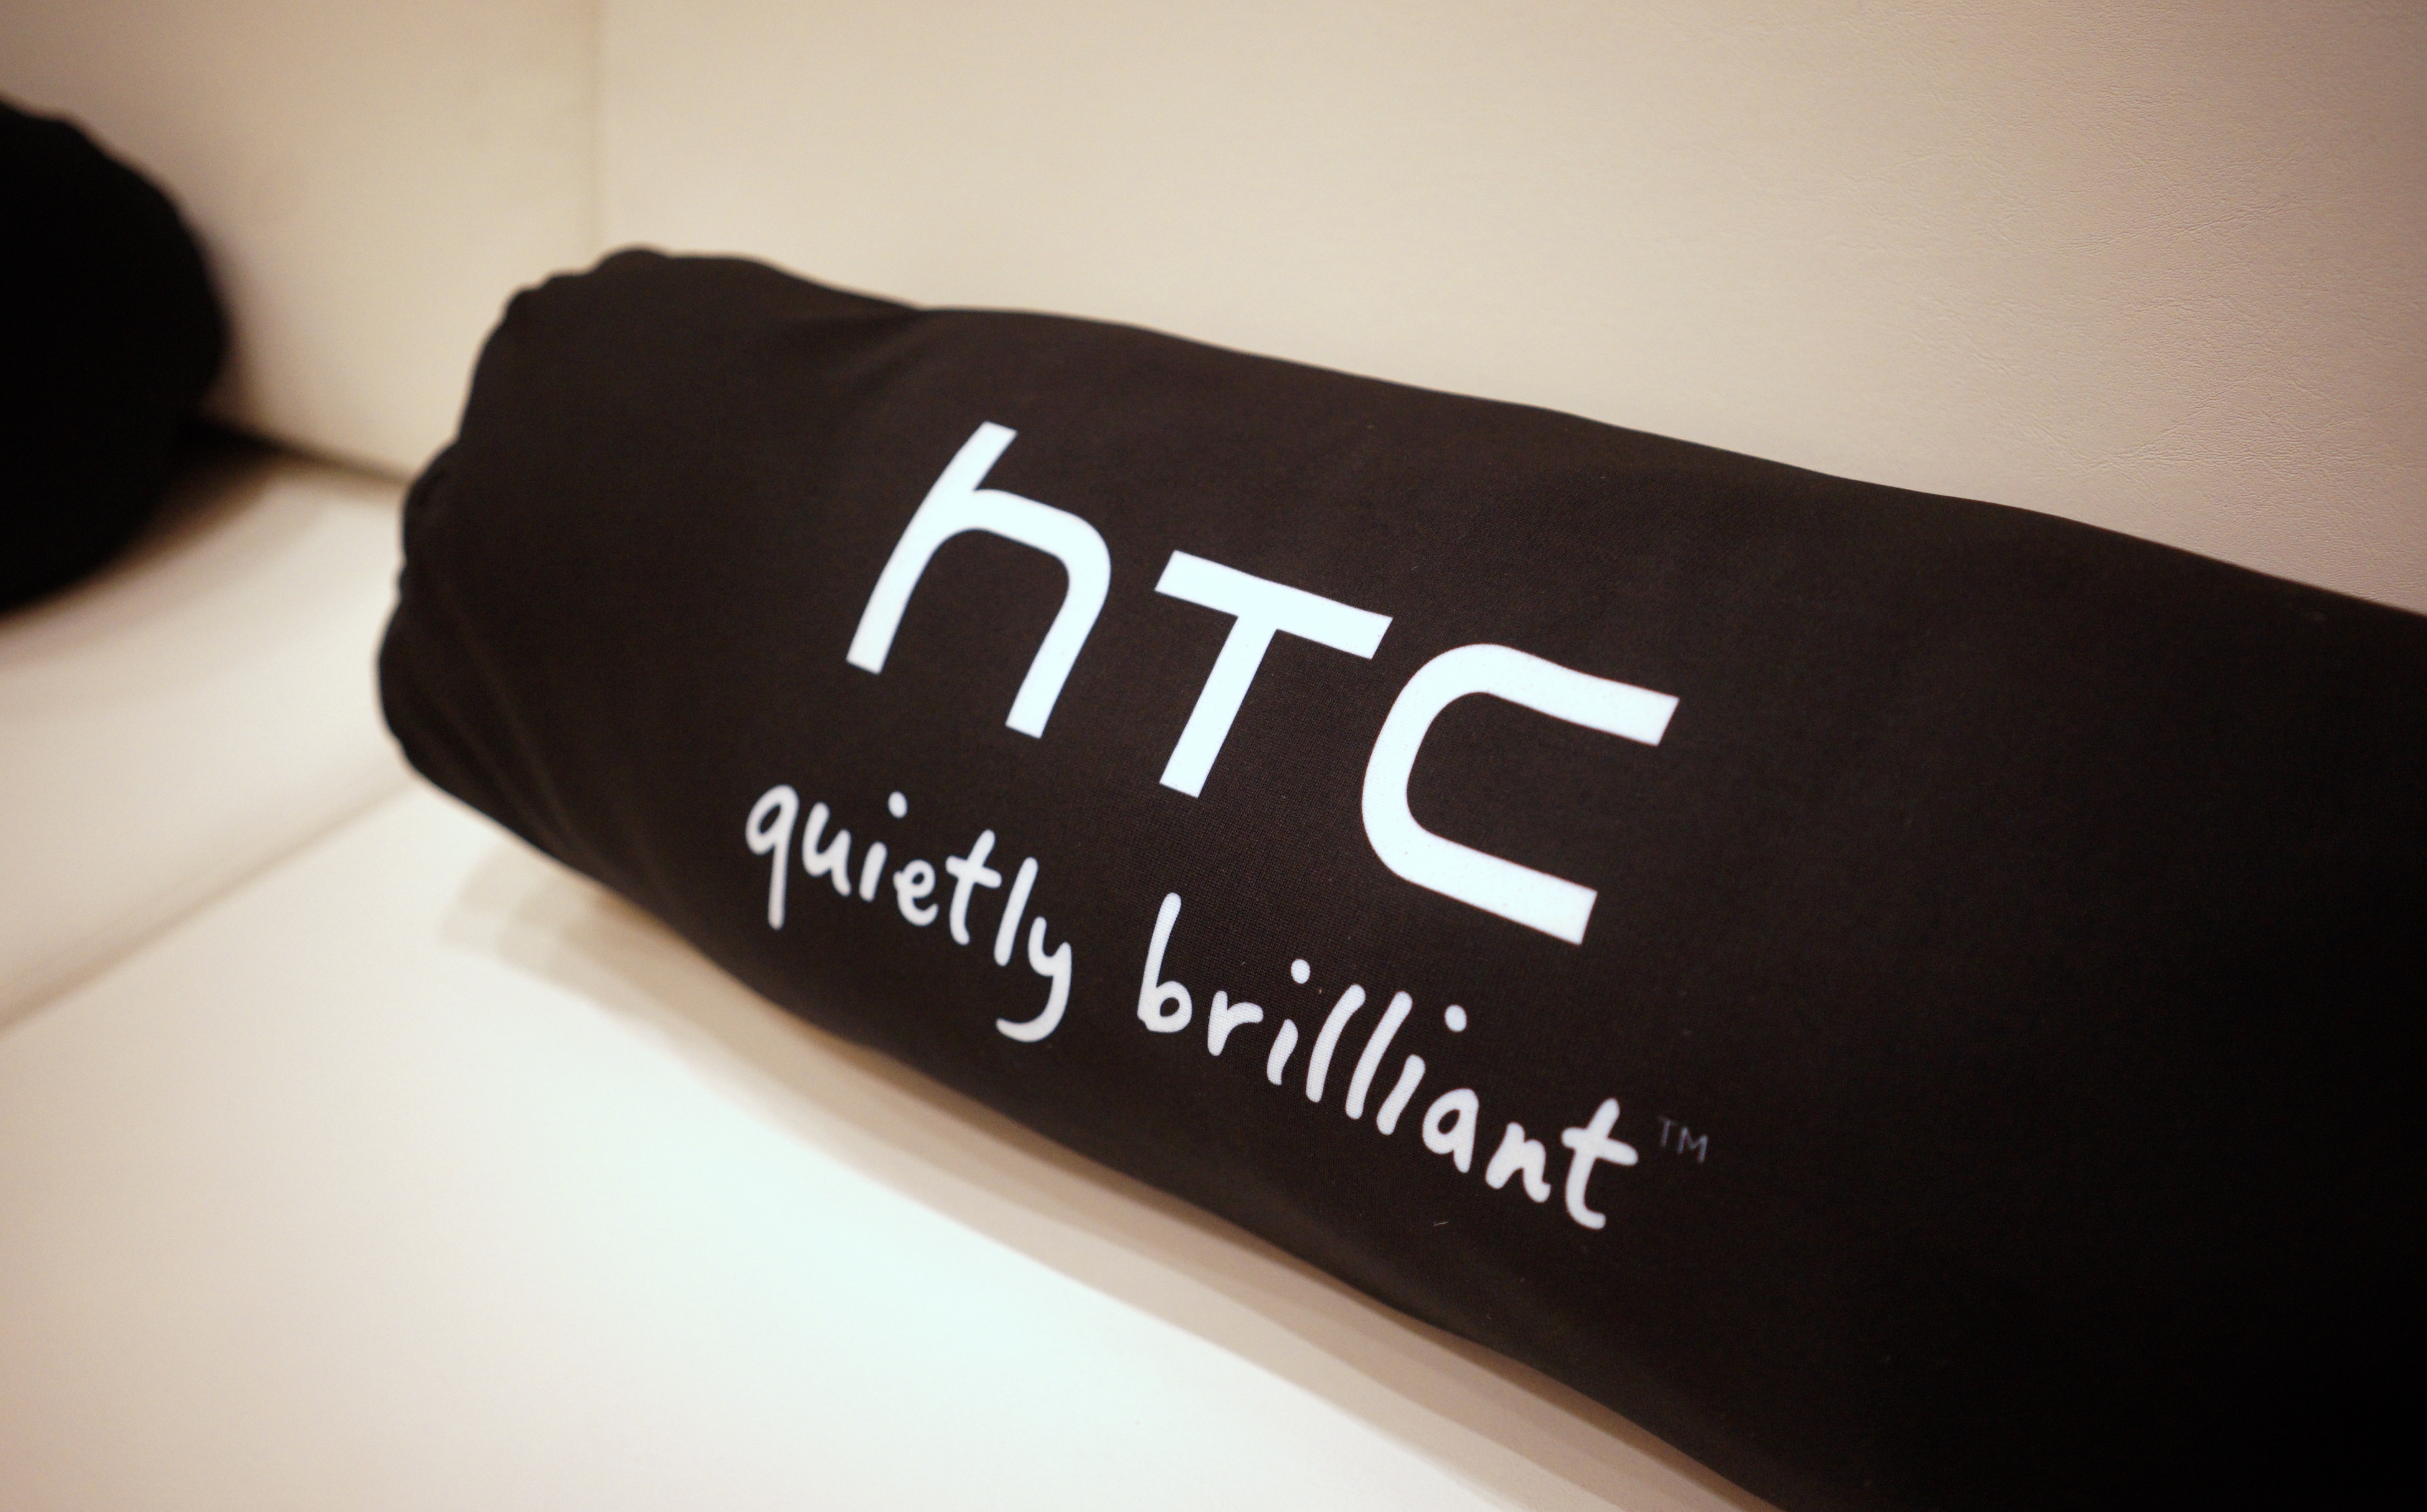 Rumor Htc S First Smart Watch Won T Run Android Wear And Here Are Its Specs Phandroid